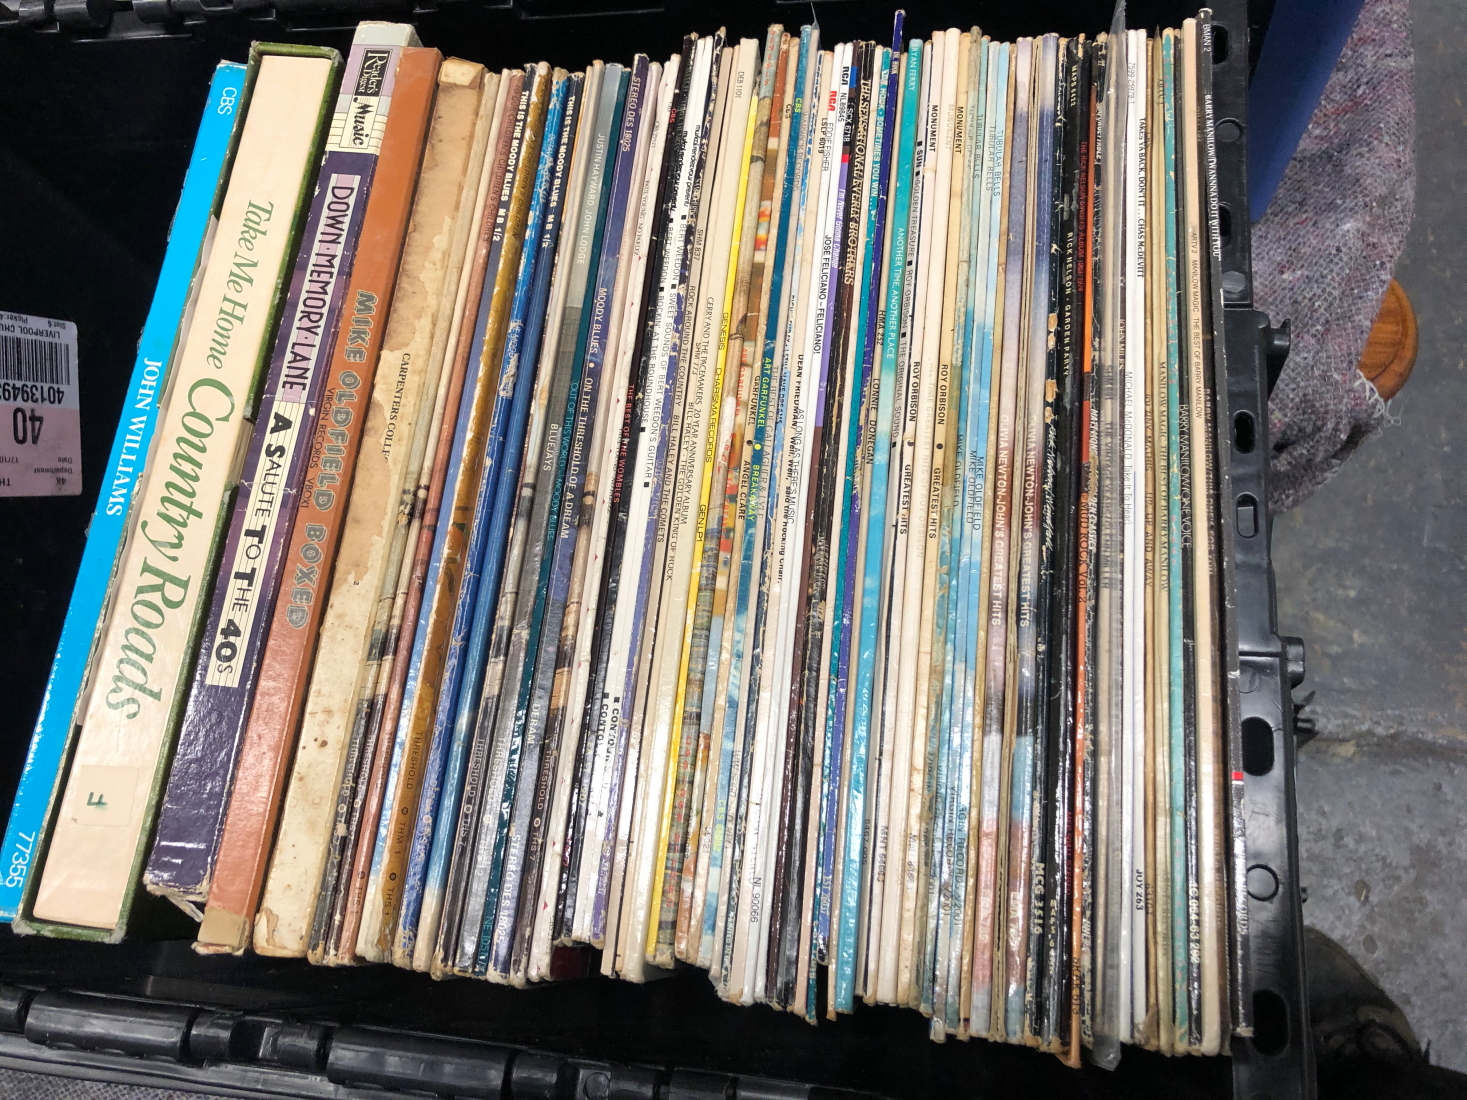 70+ ROCK AND POP LPs PLUS A SELCTIN OF LP BOX SETS - 1970s/1980s - Image 4 of 5